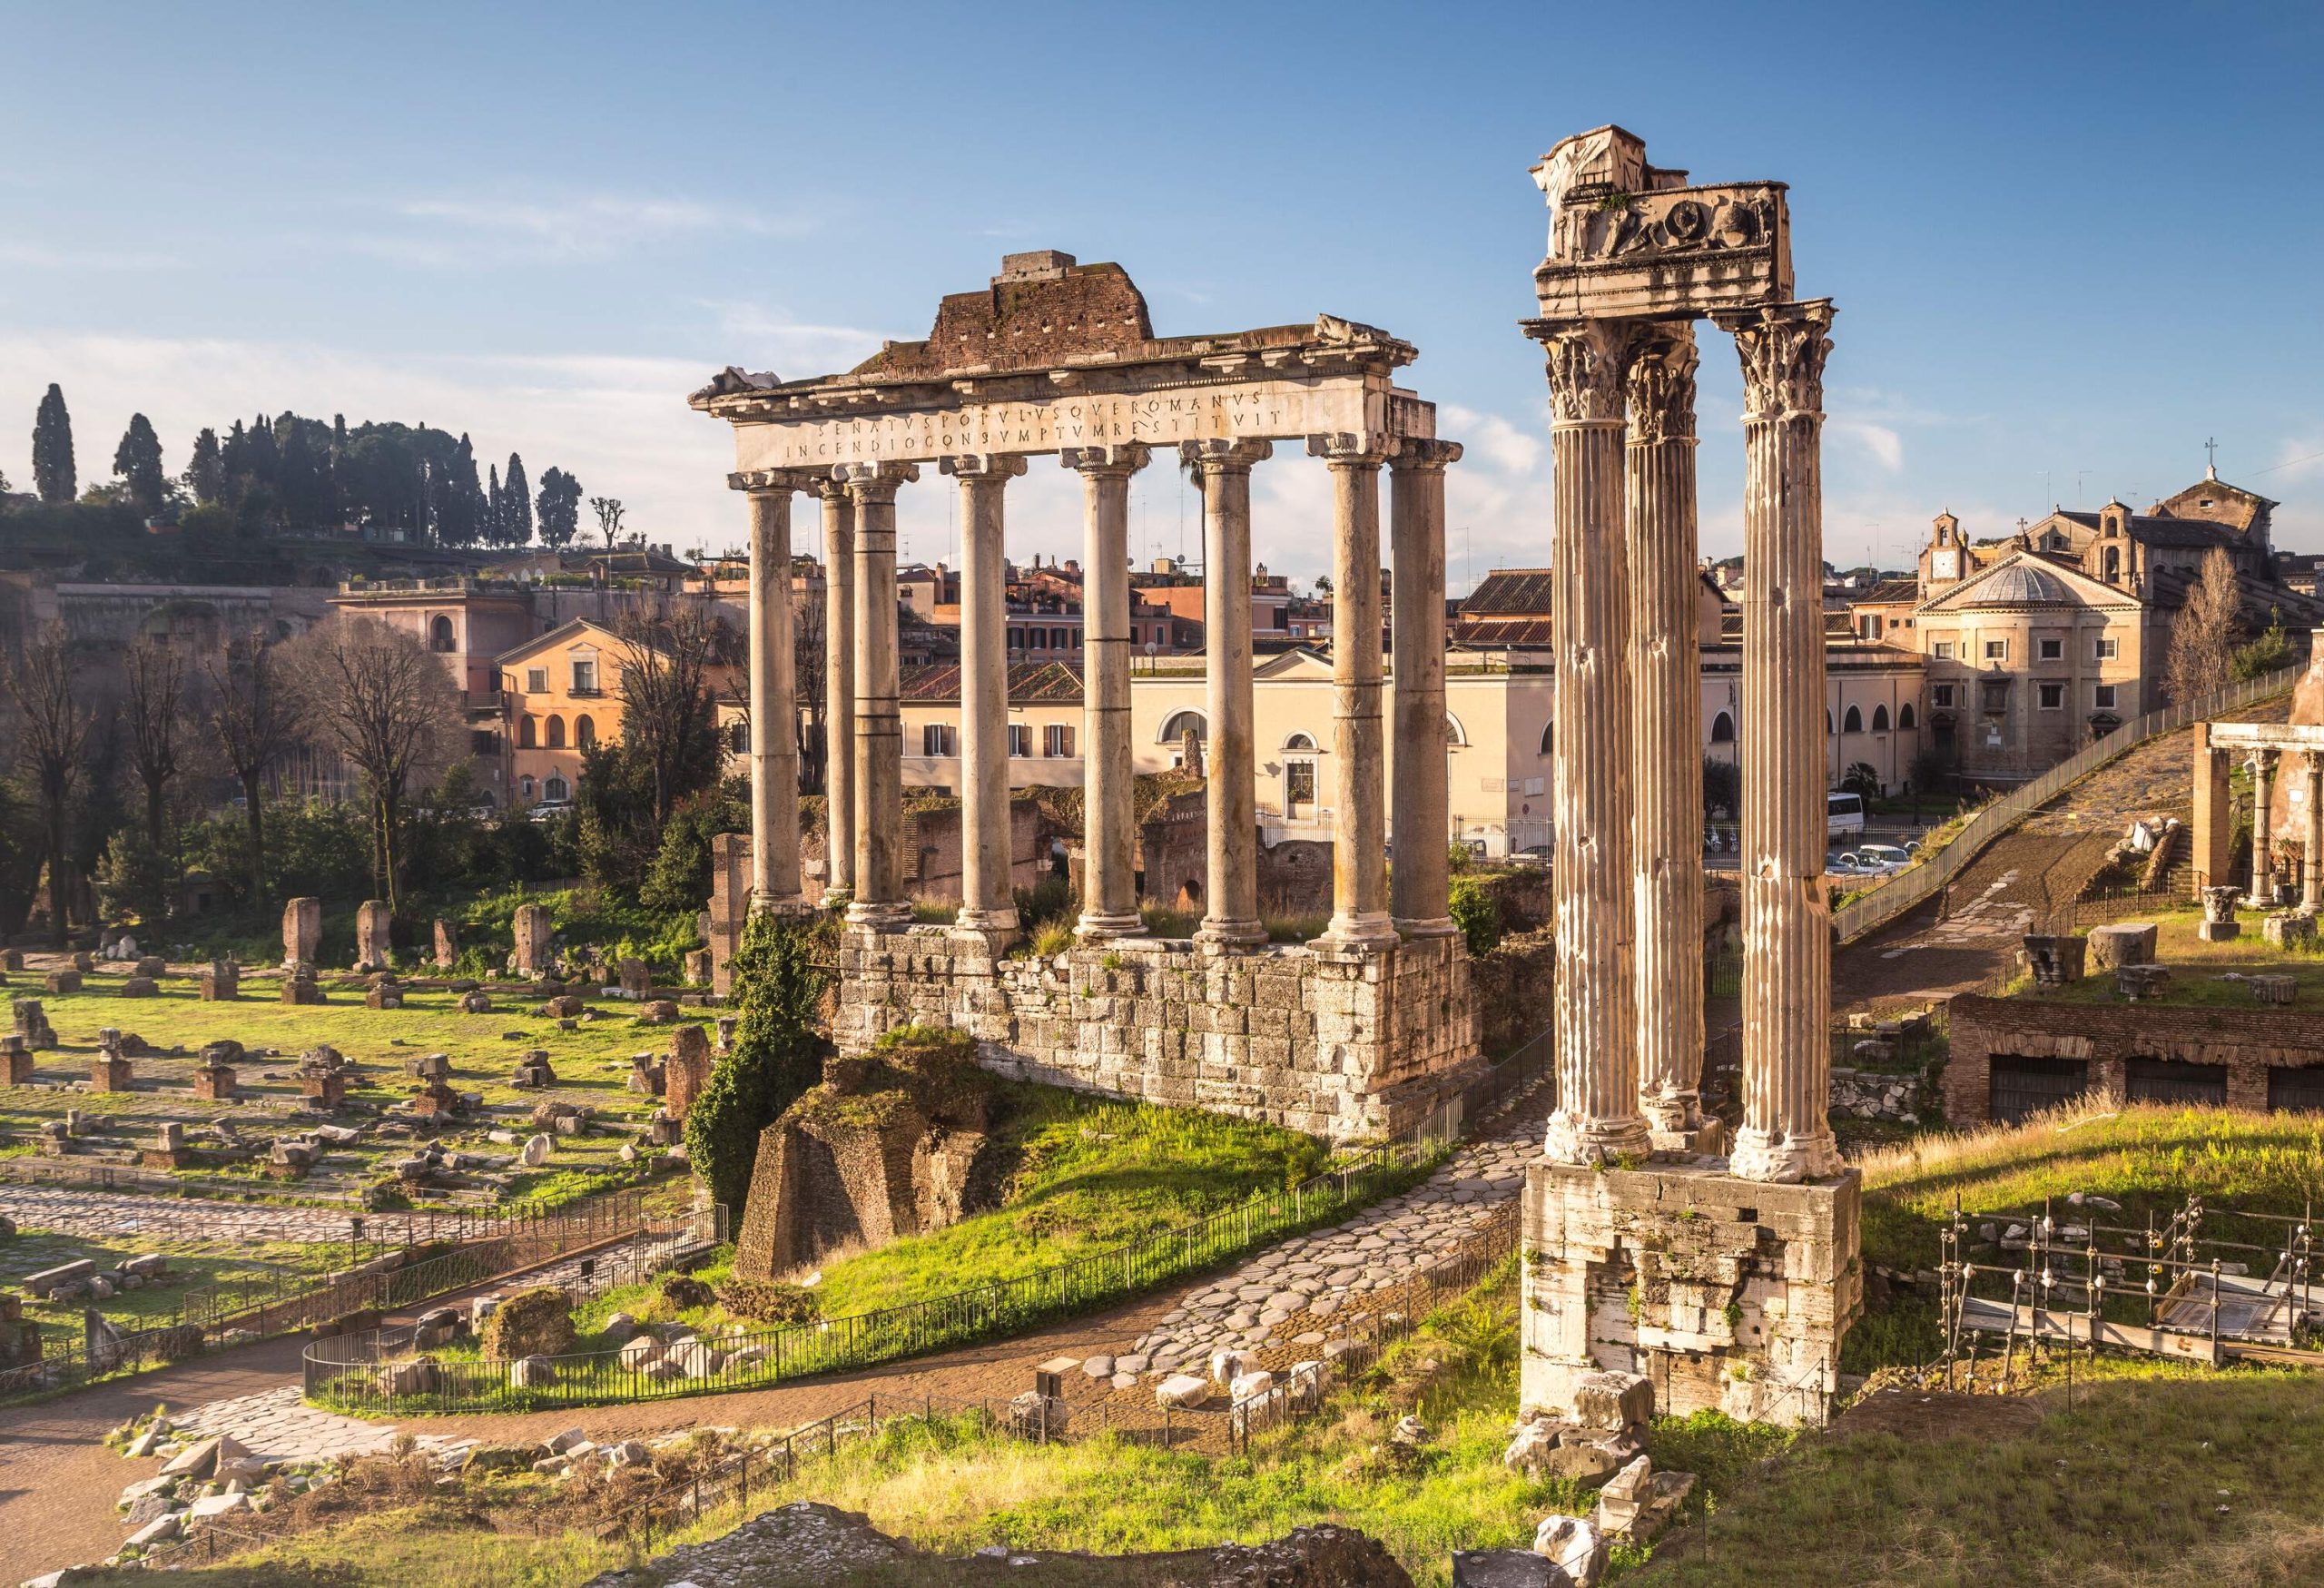 The Roman Forum contains the ruins of some important ancient structures surrounded by a thick cluster of compact buildings.